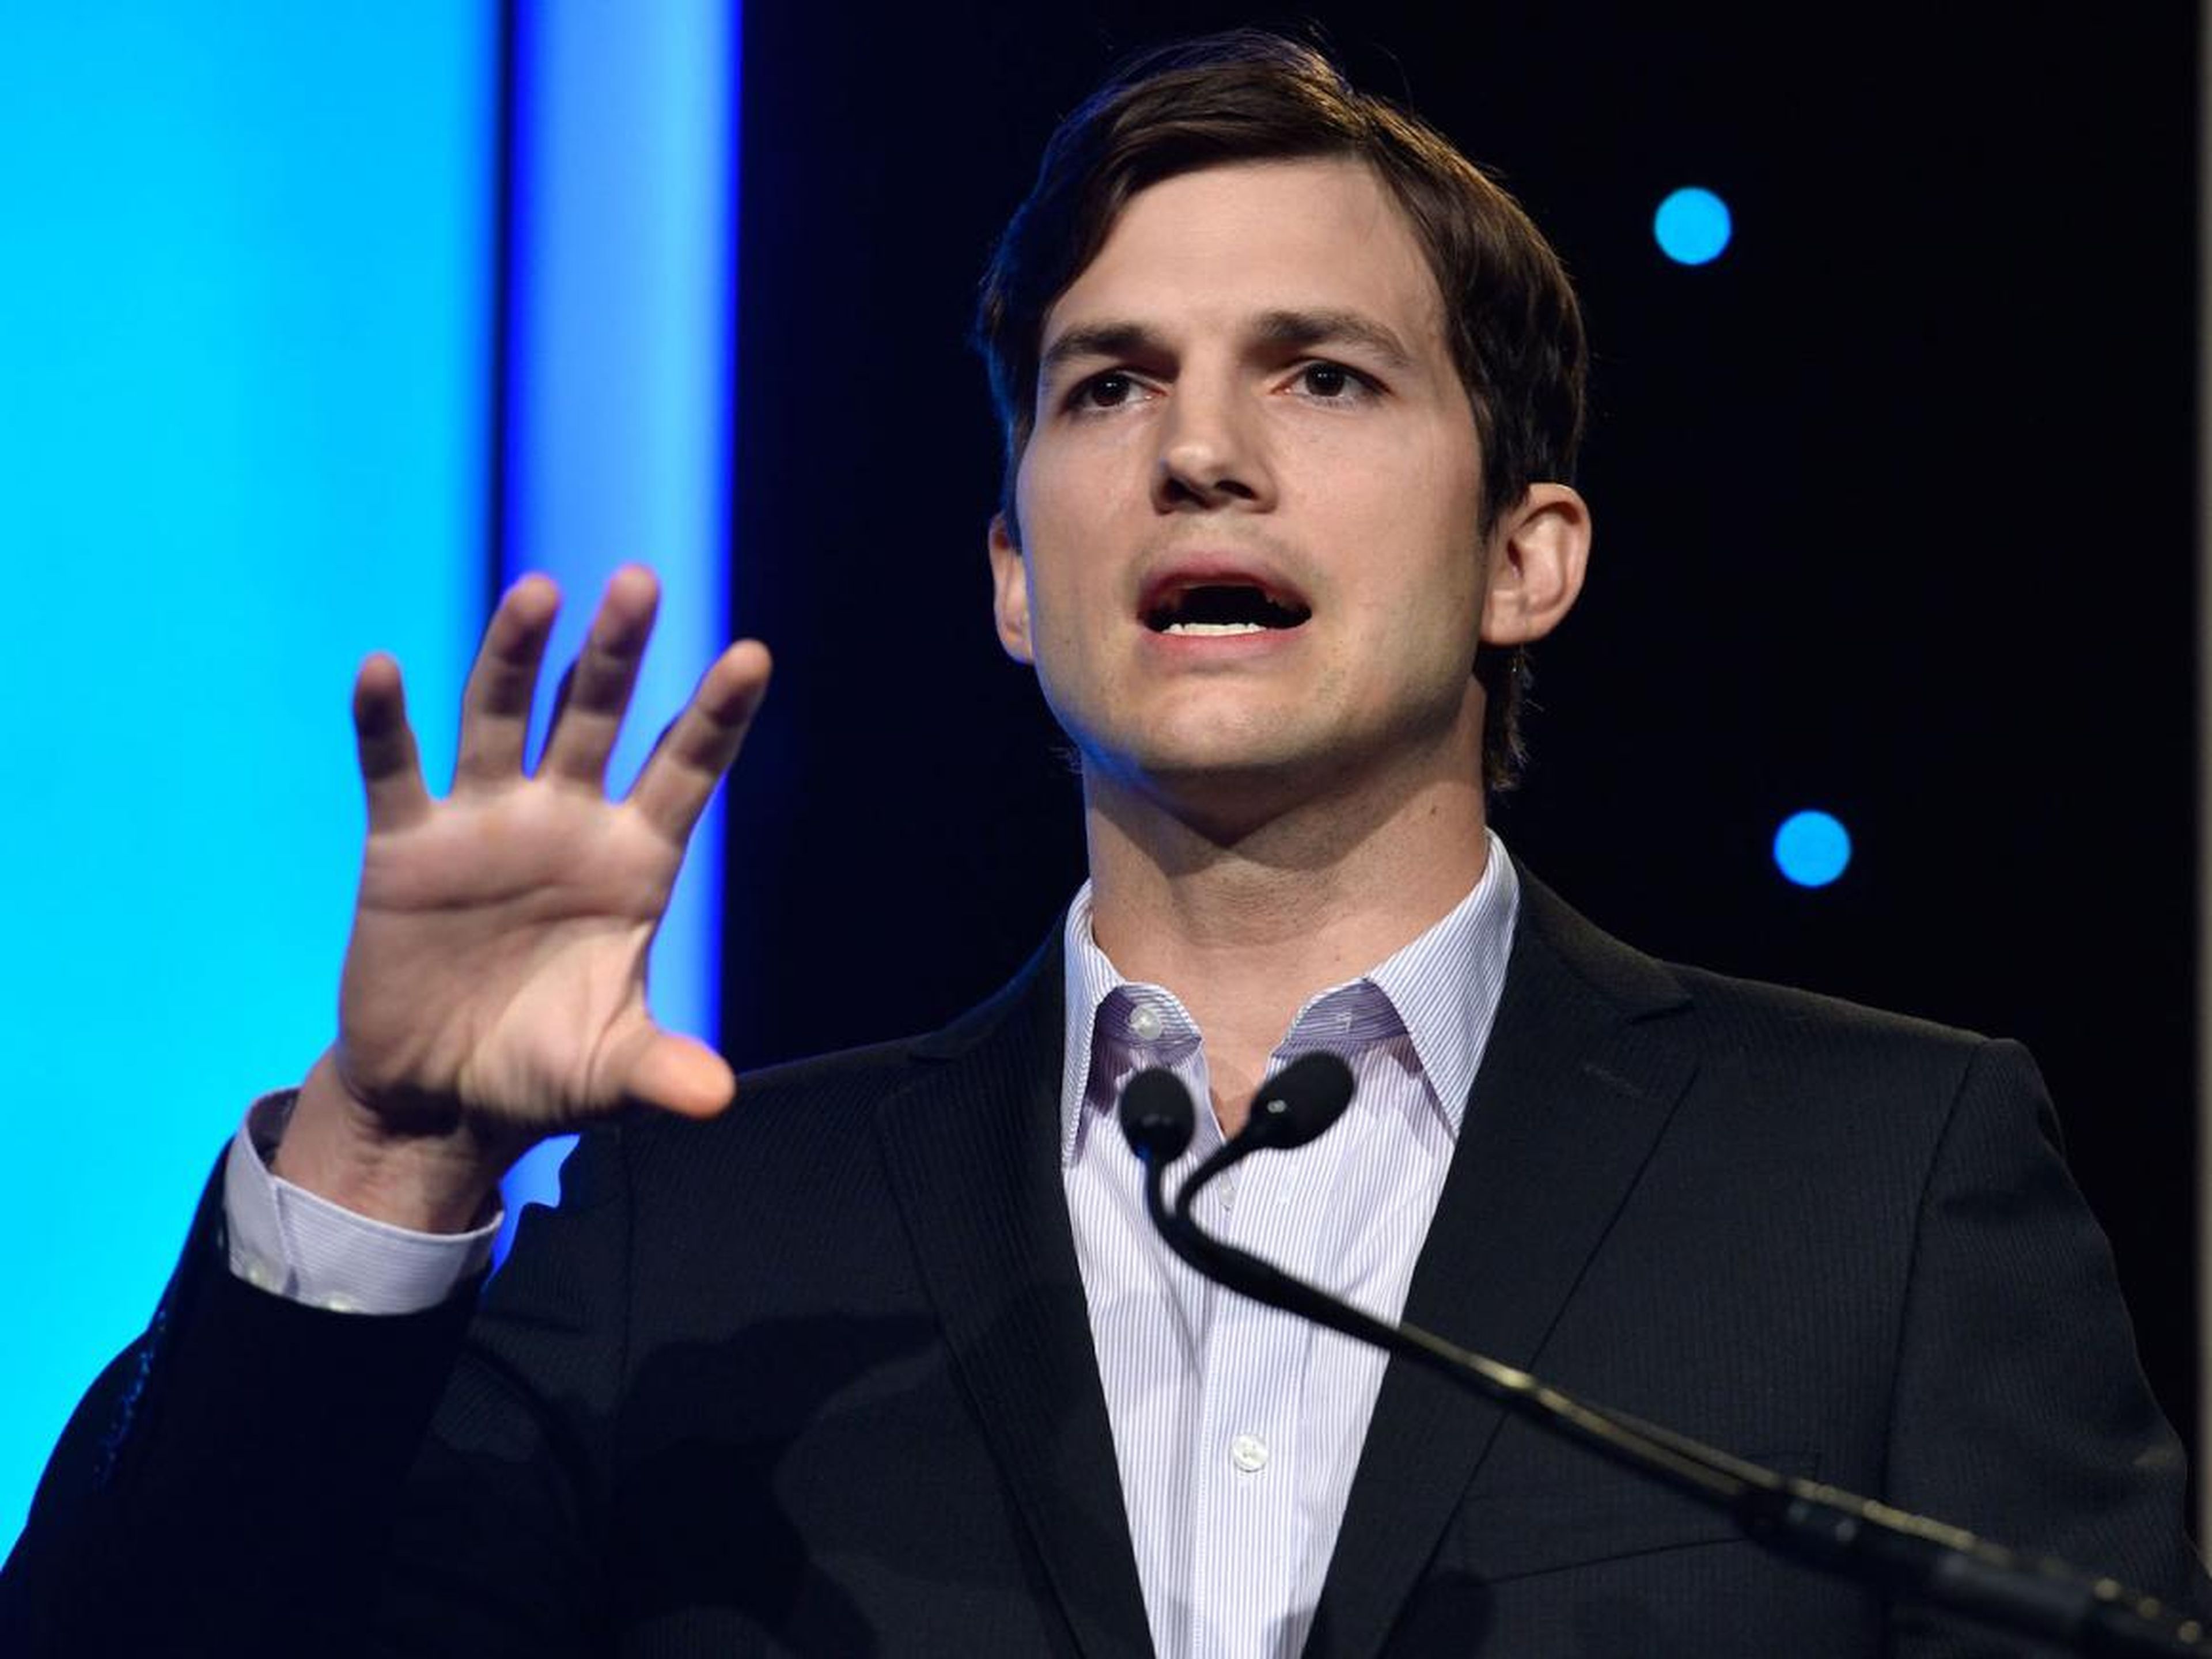 Kutcher put down a $20,000 deposit for his $200,000 ticket in 2012.